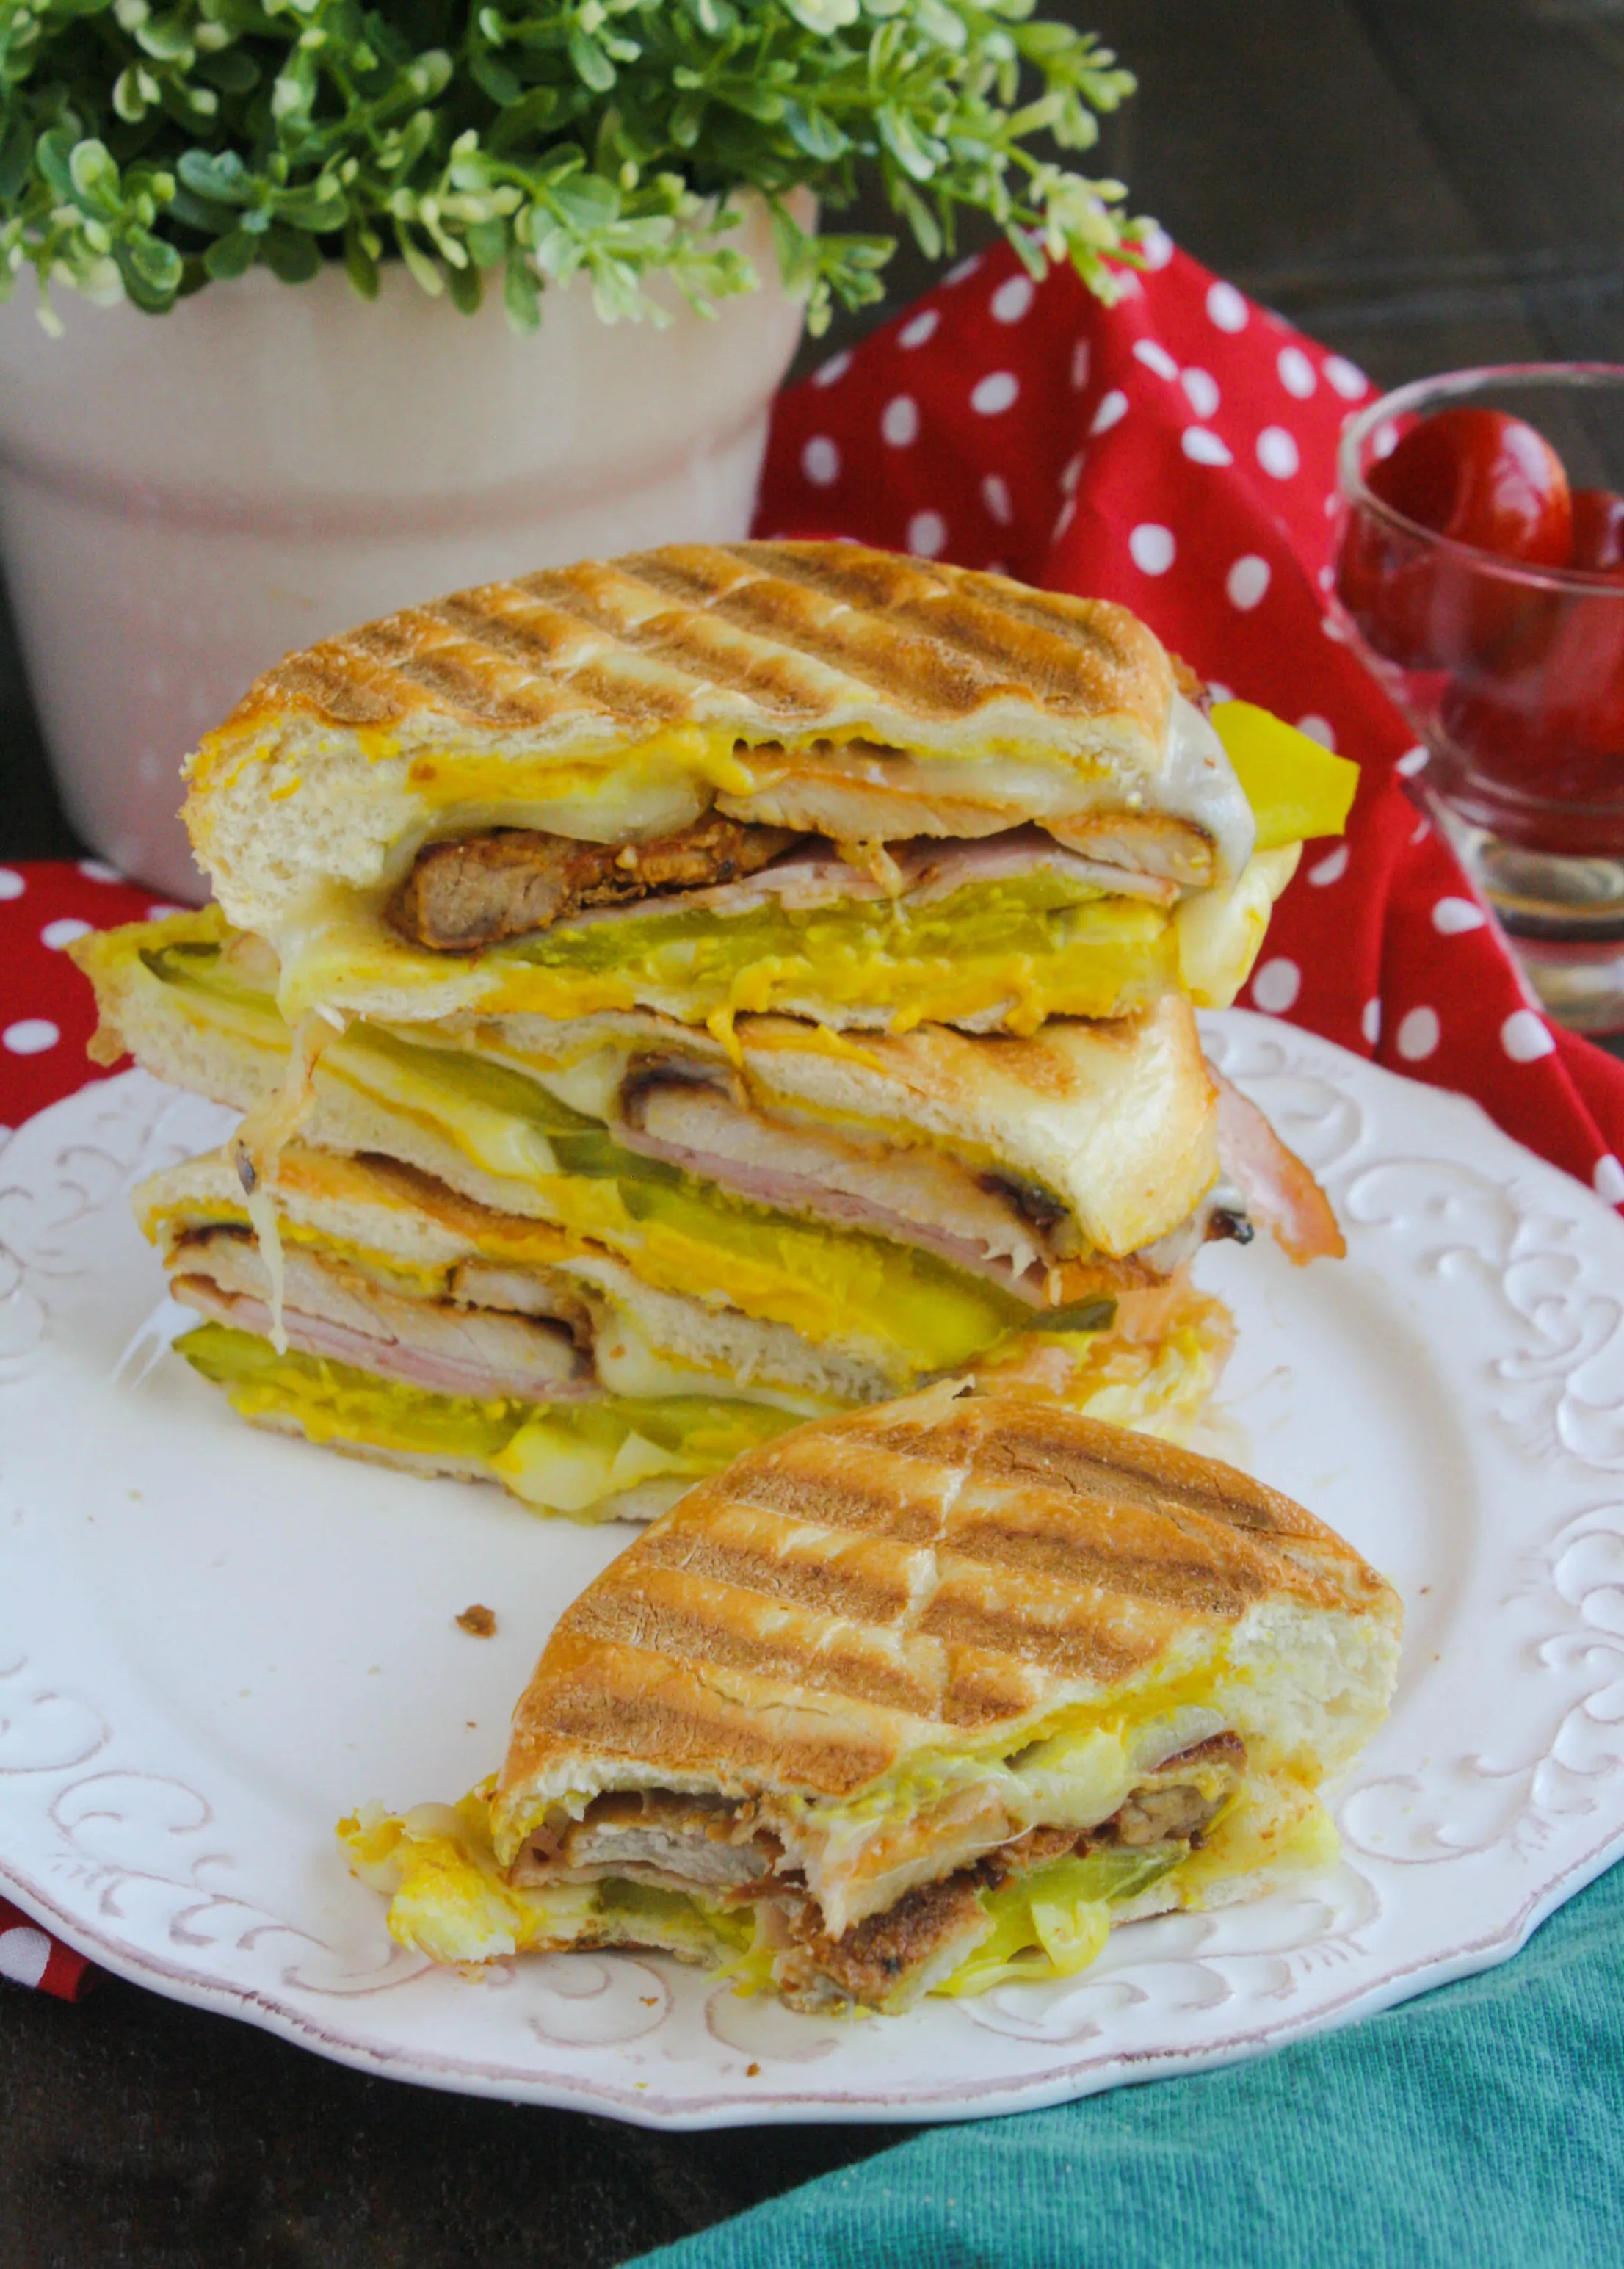 A Cuban sandwich is thick, hearty, and big on flavor. You'll love it!